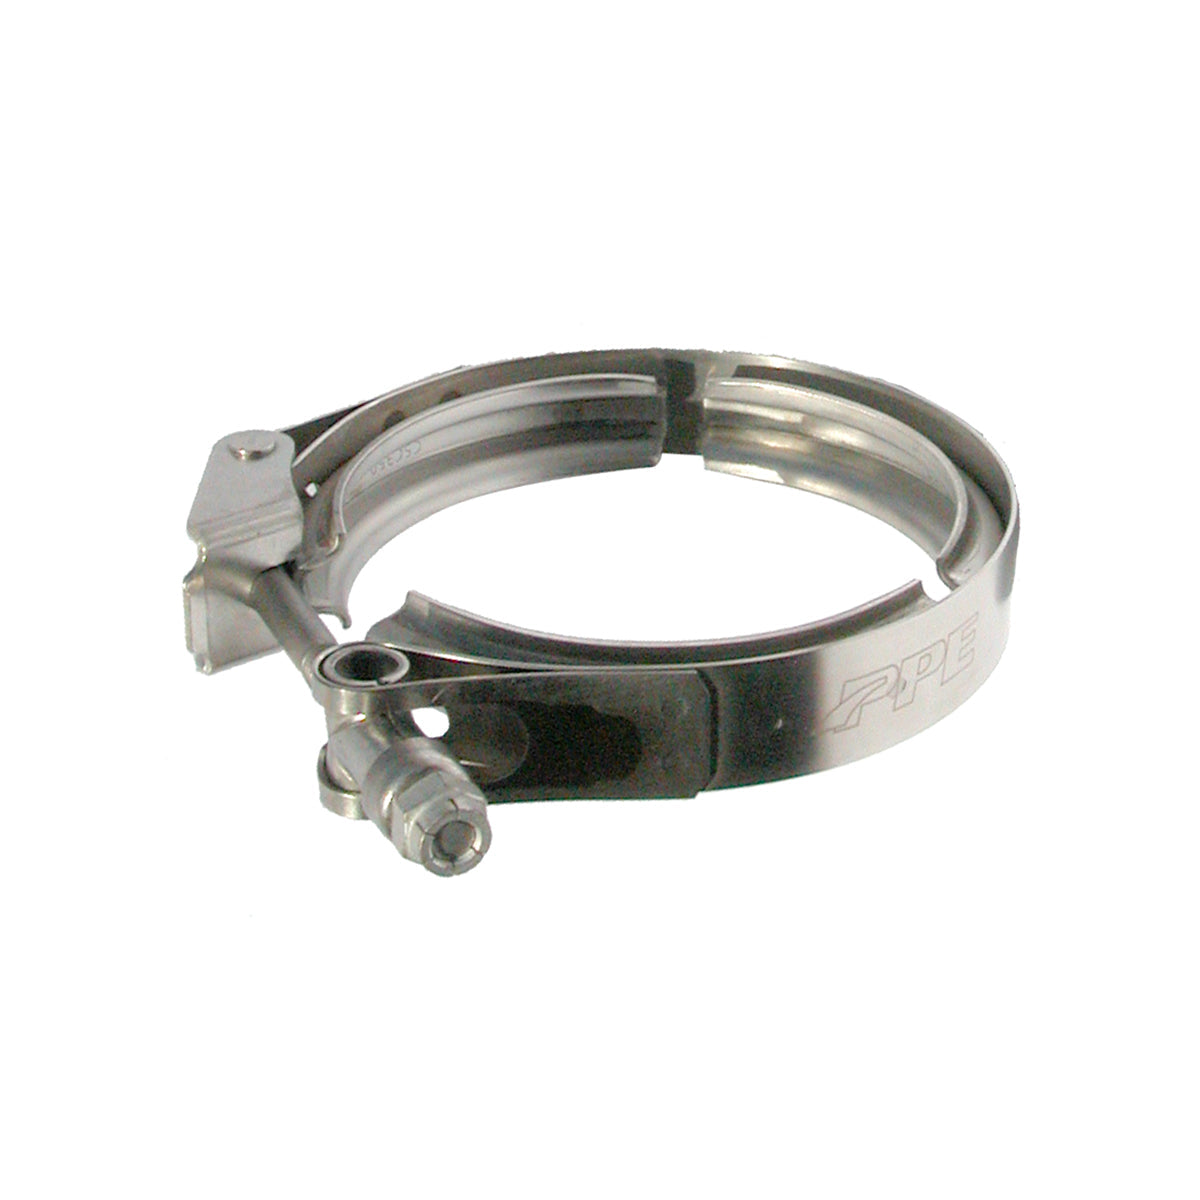 V-Band Clamp - Quick Release (QR) - 304 Stainless Steel (Built To Order) ppepower